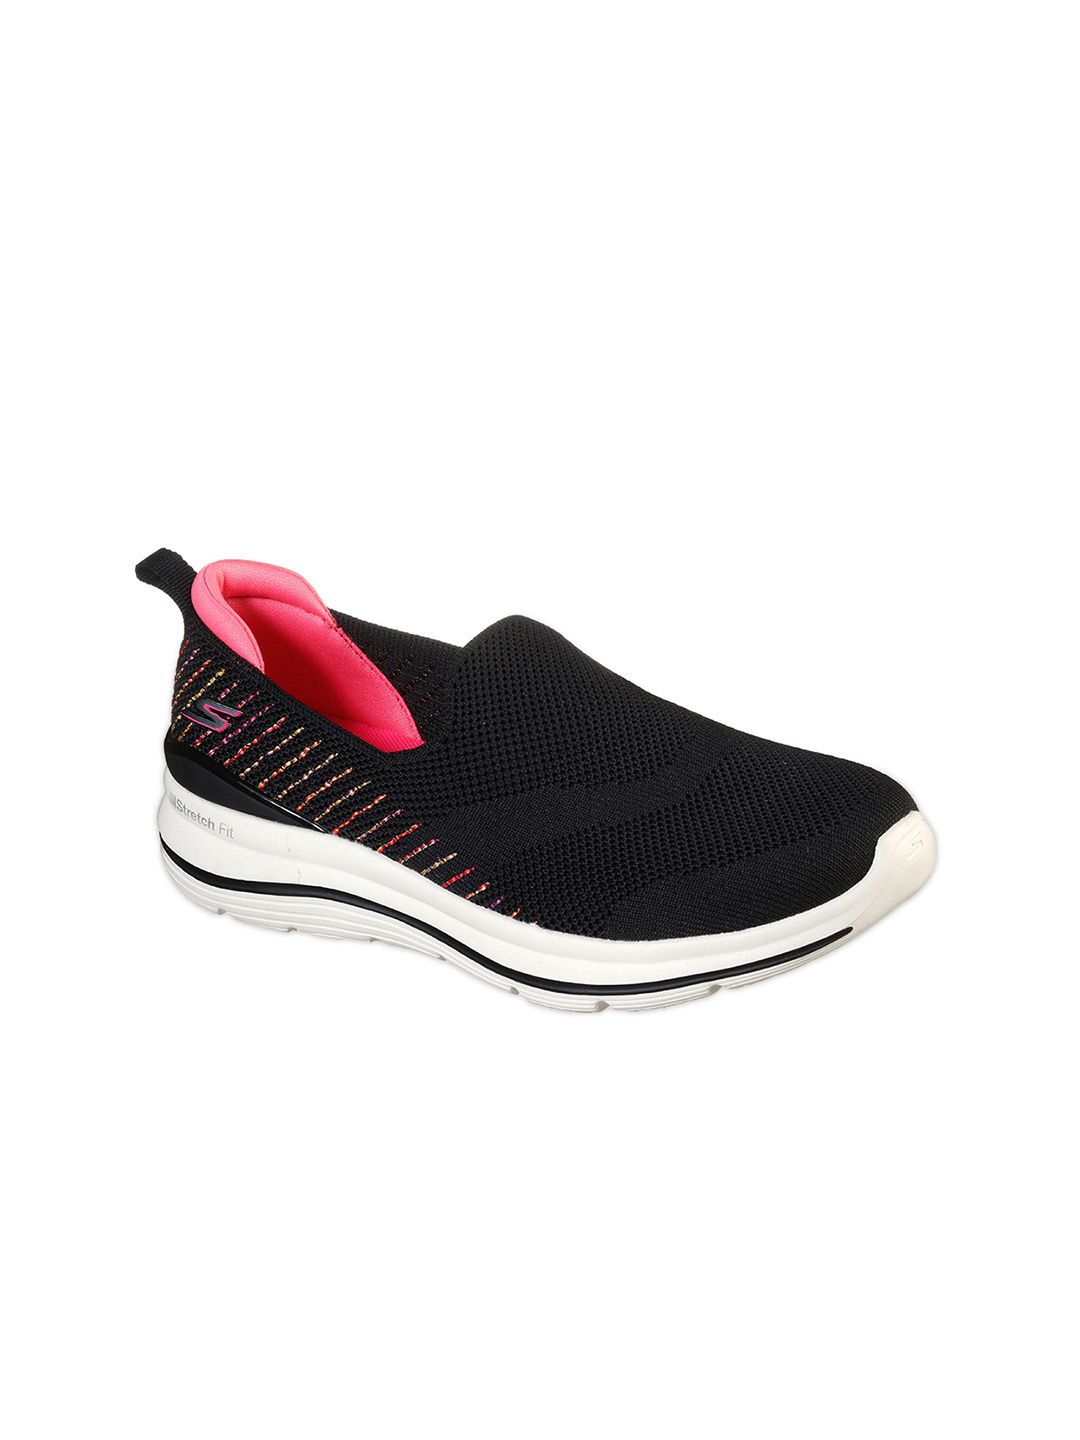 Skechers Women Black Sports Shoes Price in India